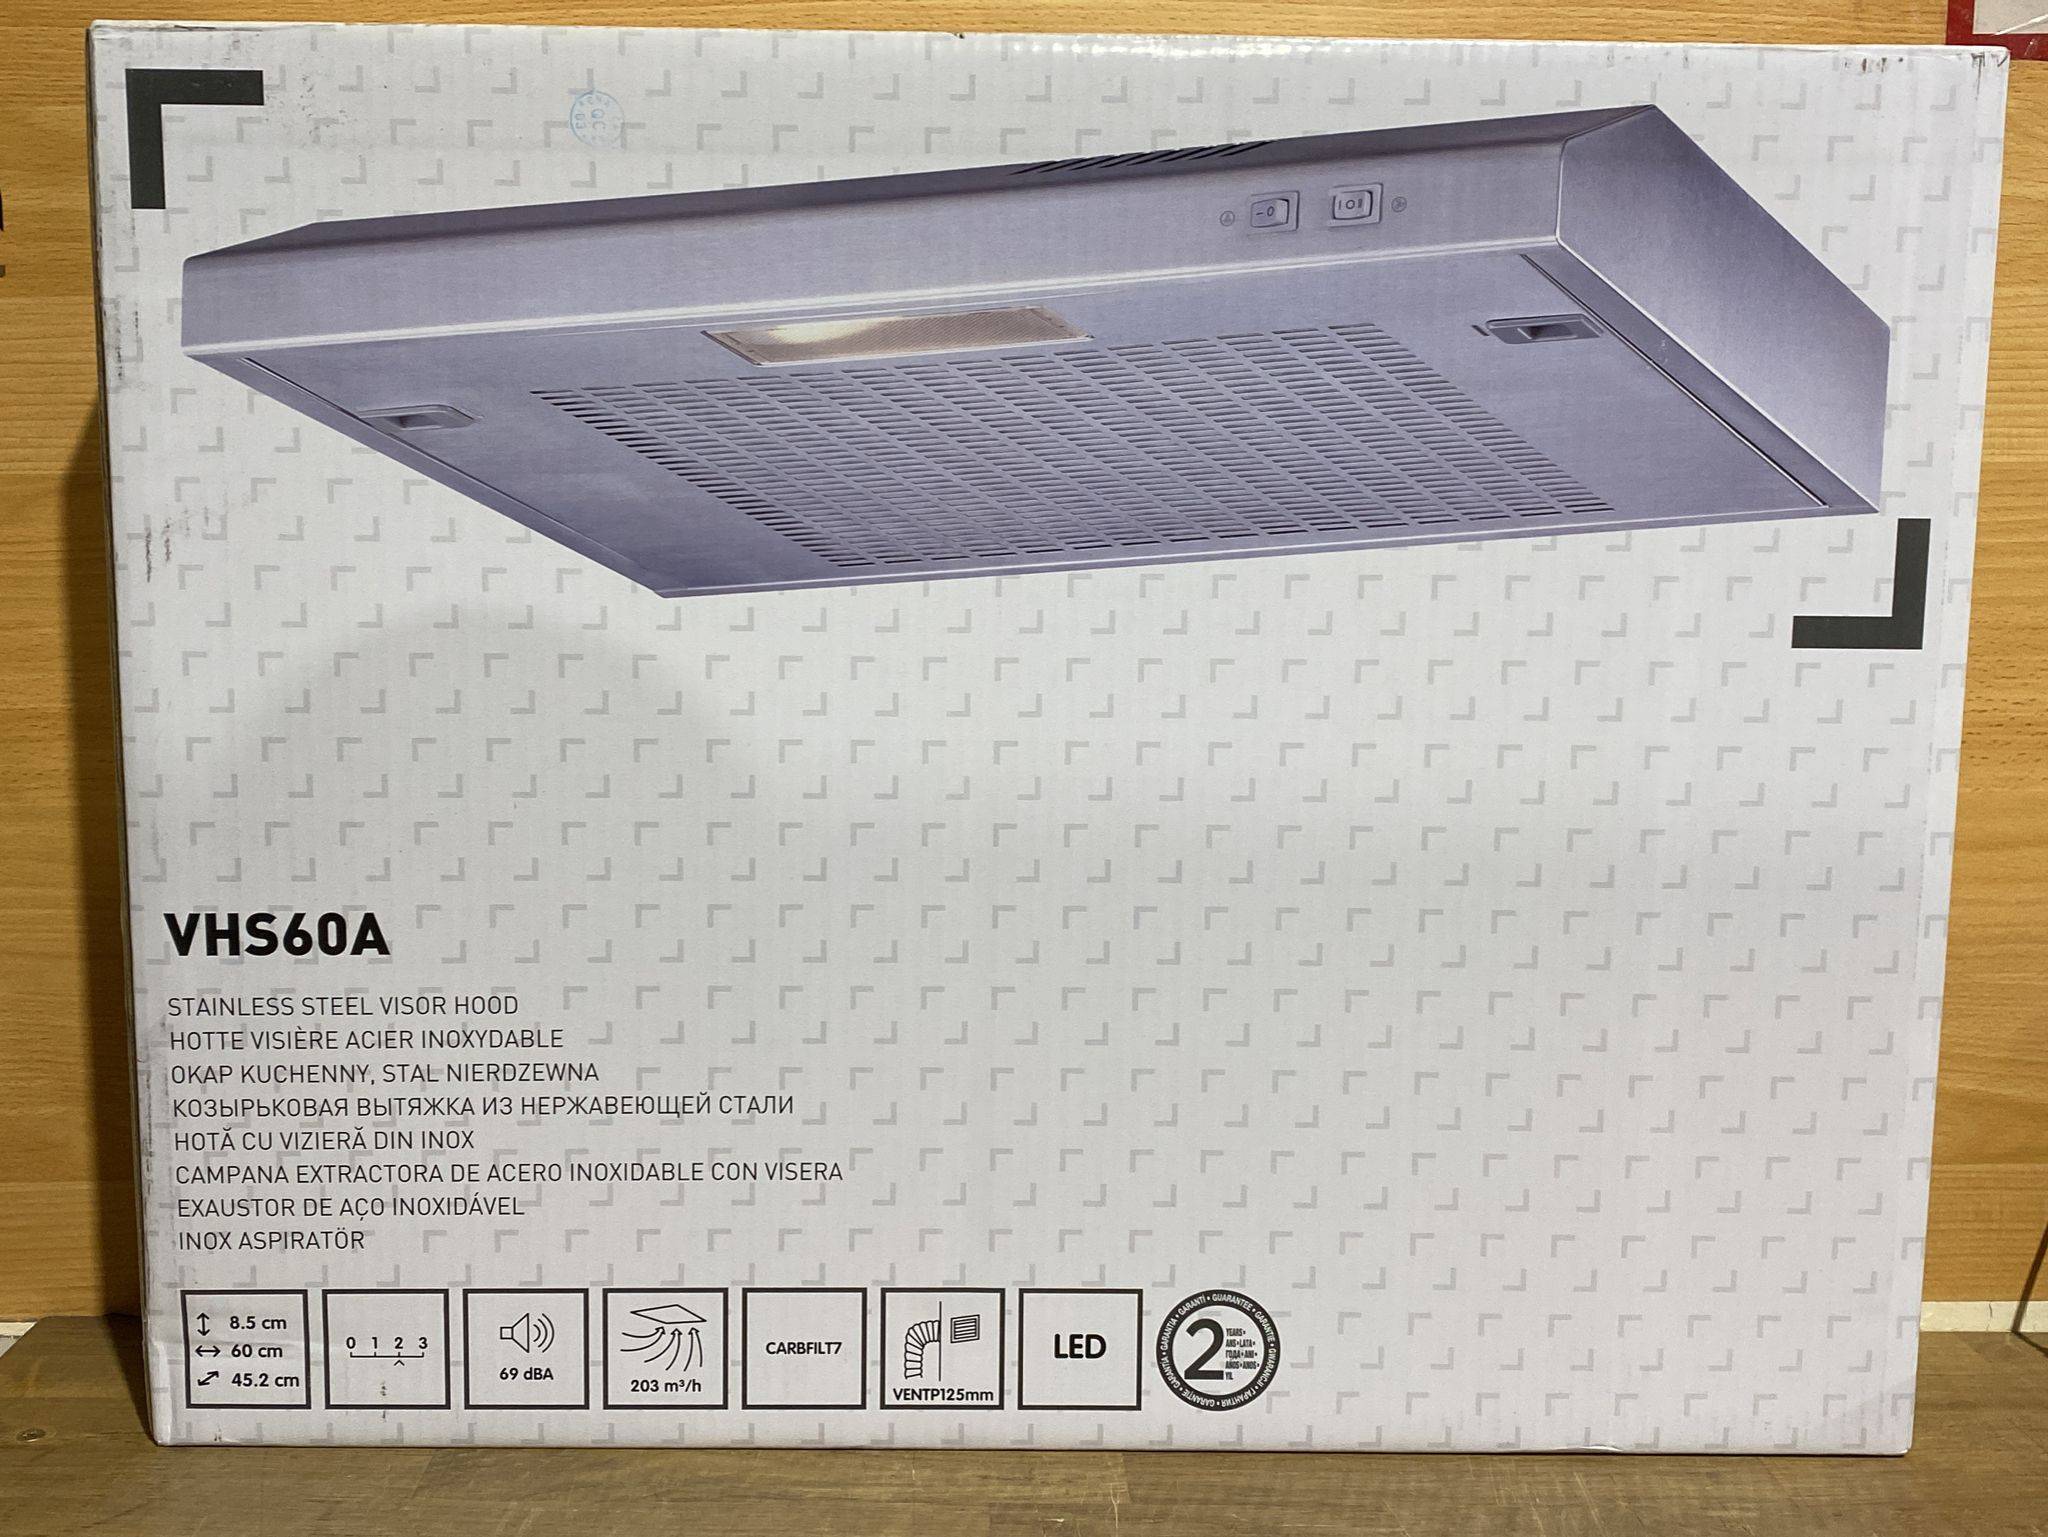 Cooker hood Stainless steel,(W)60cm VHS60A 4464